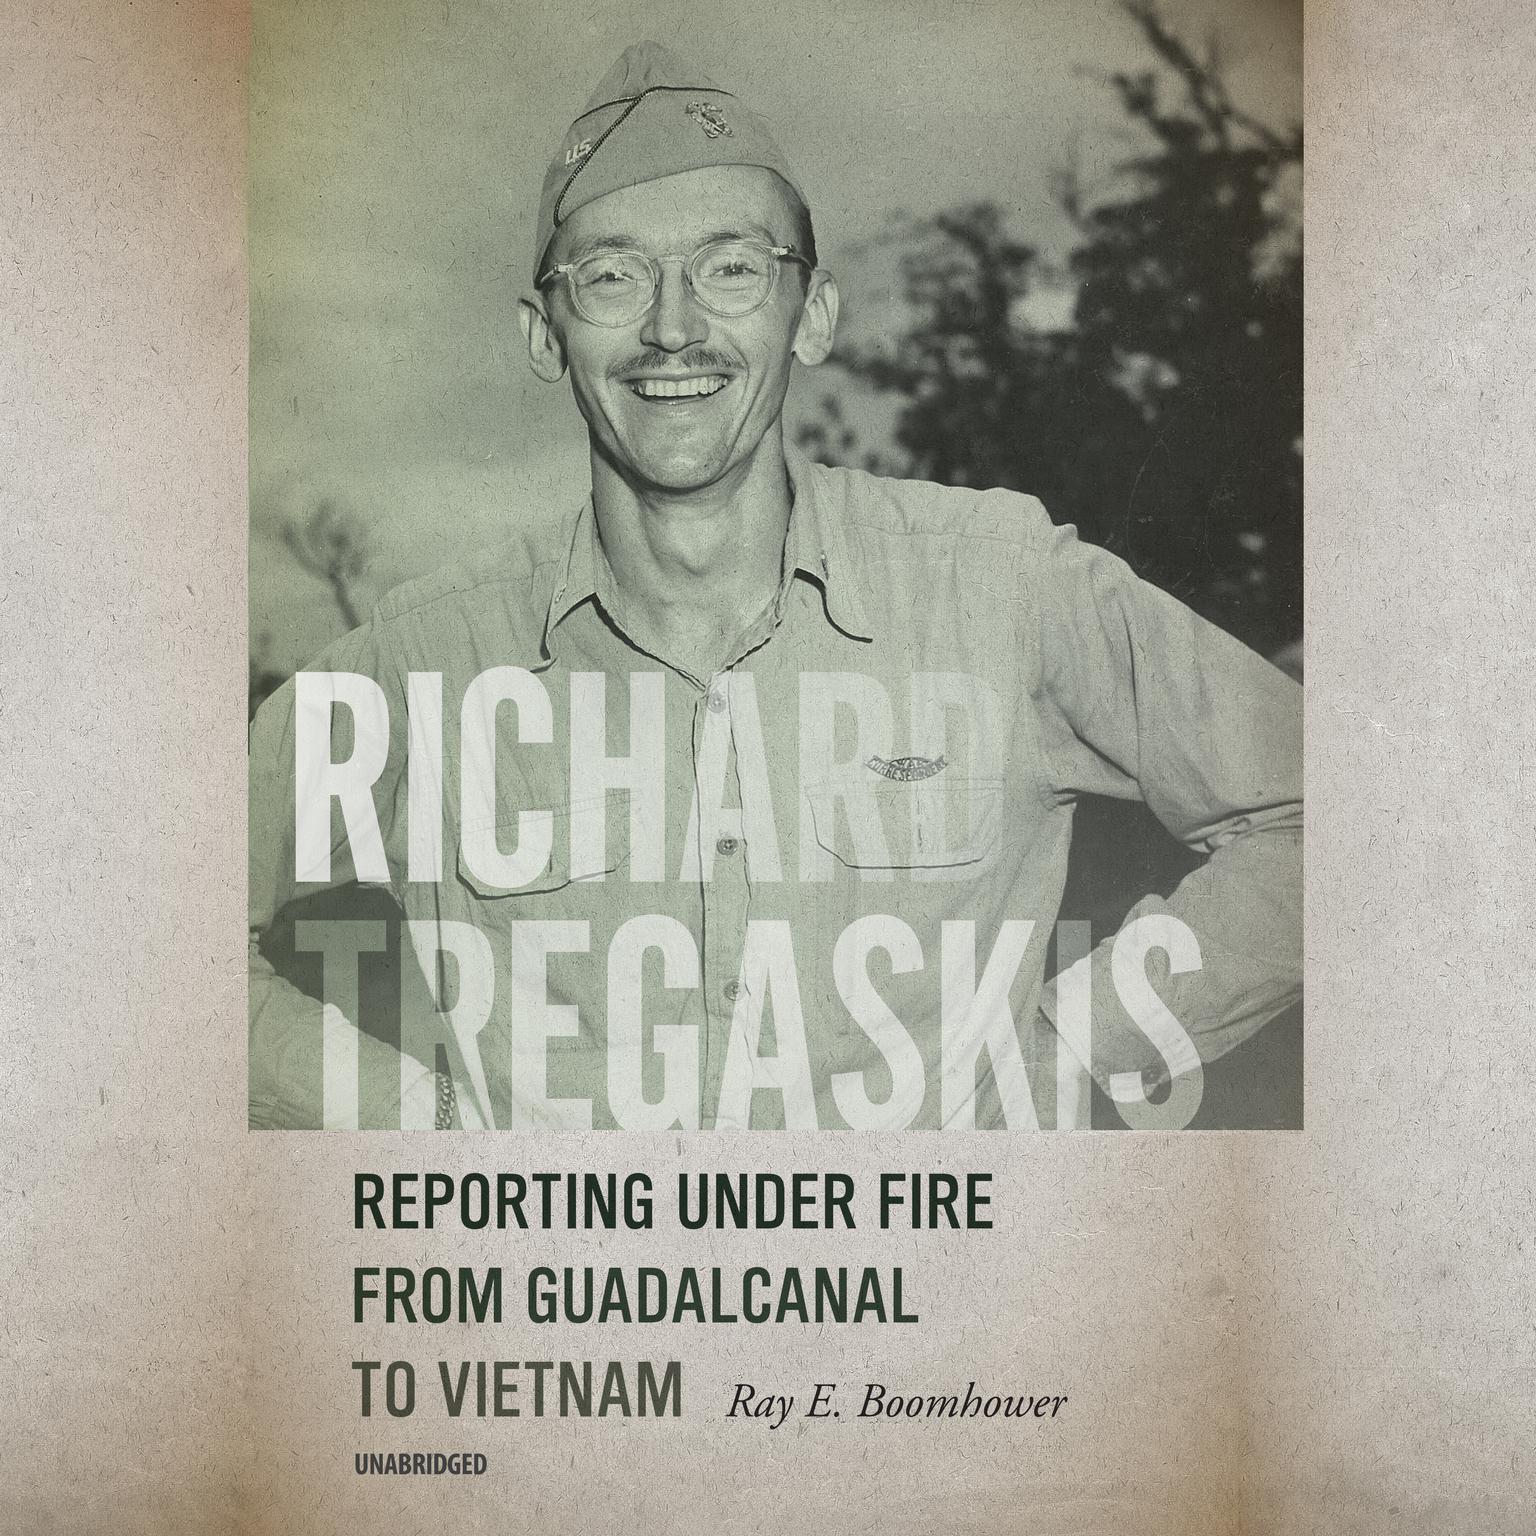 Richard Tregaskis: Reporting under Fire from Guadalcanal to Vietnam Audiobook, by Ray E. Boomhower